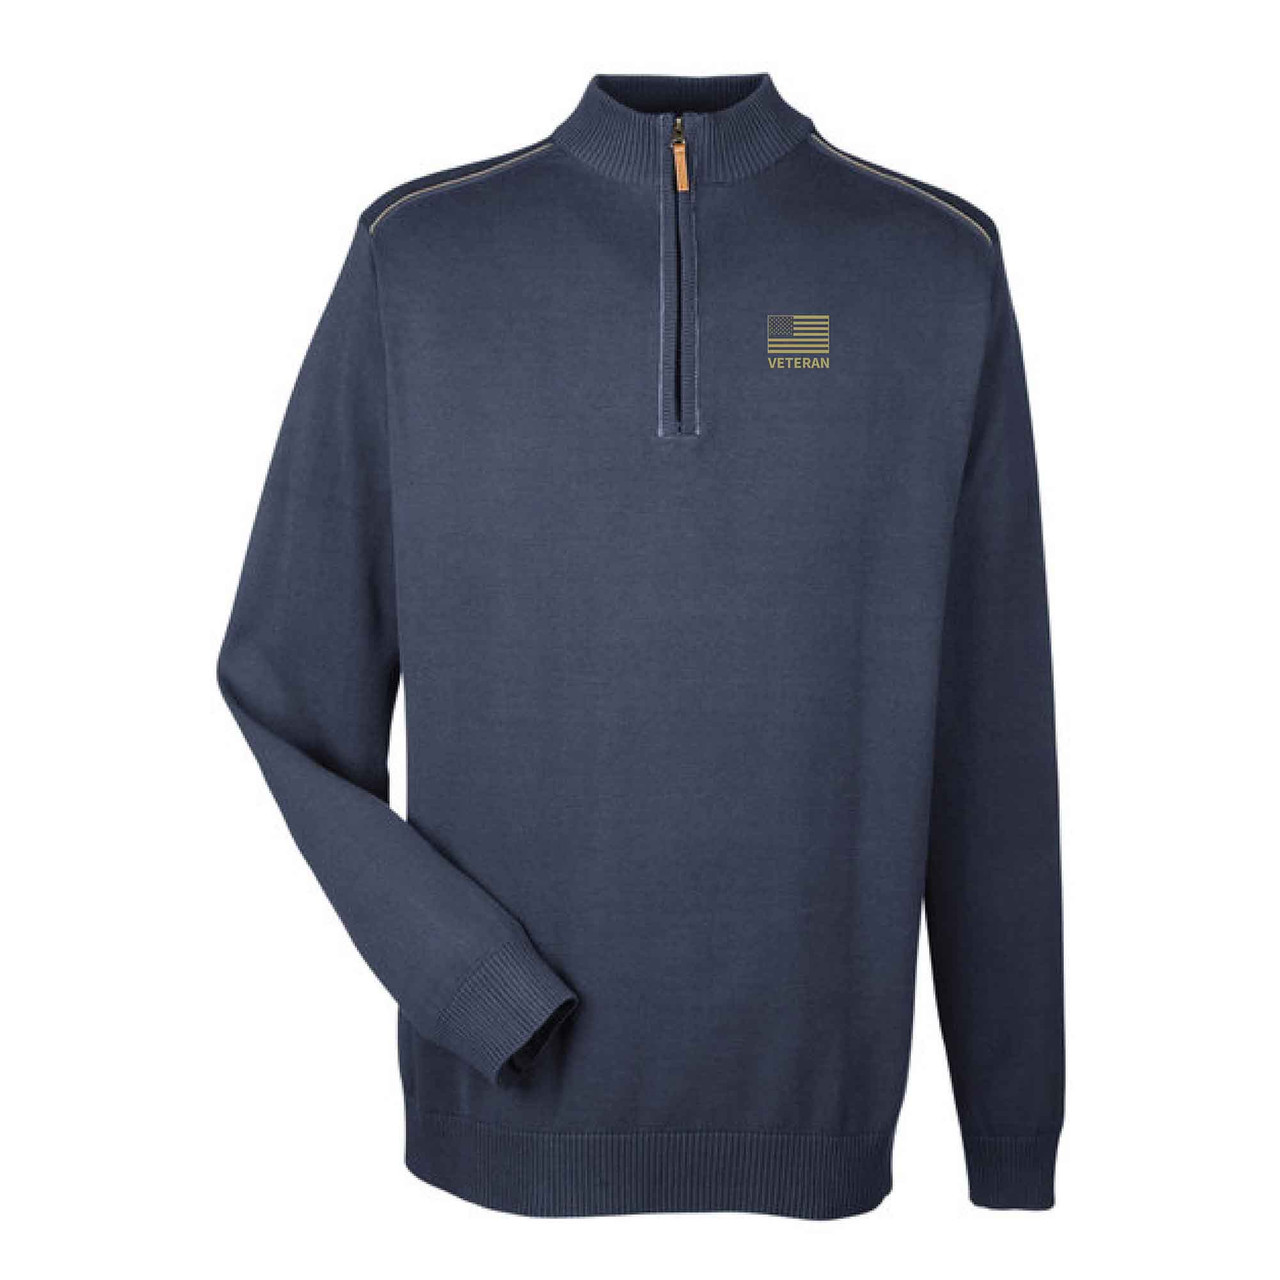 Clubhouse Classic Quarter Zip sweater with Embroidered Flag and Veteran Text